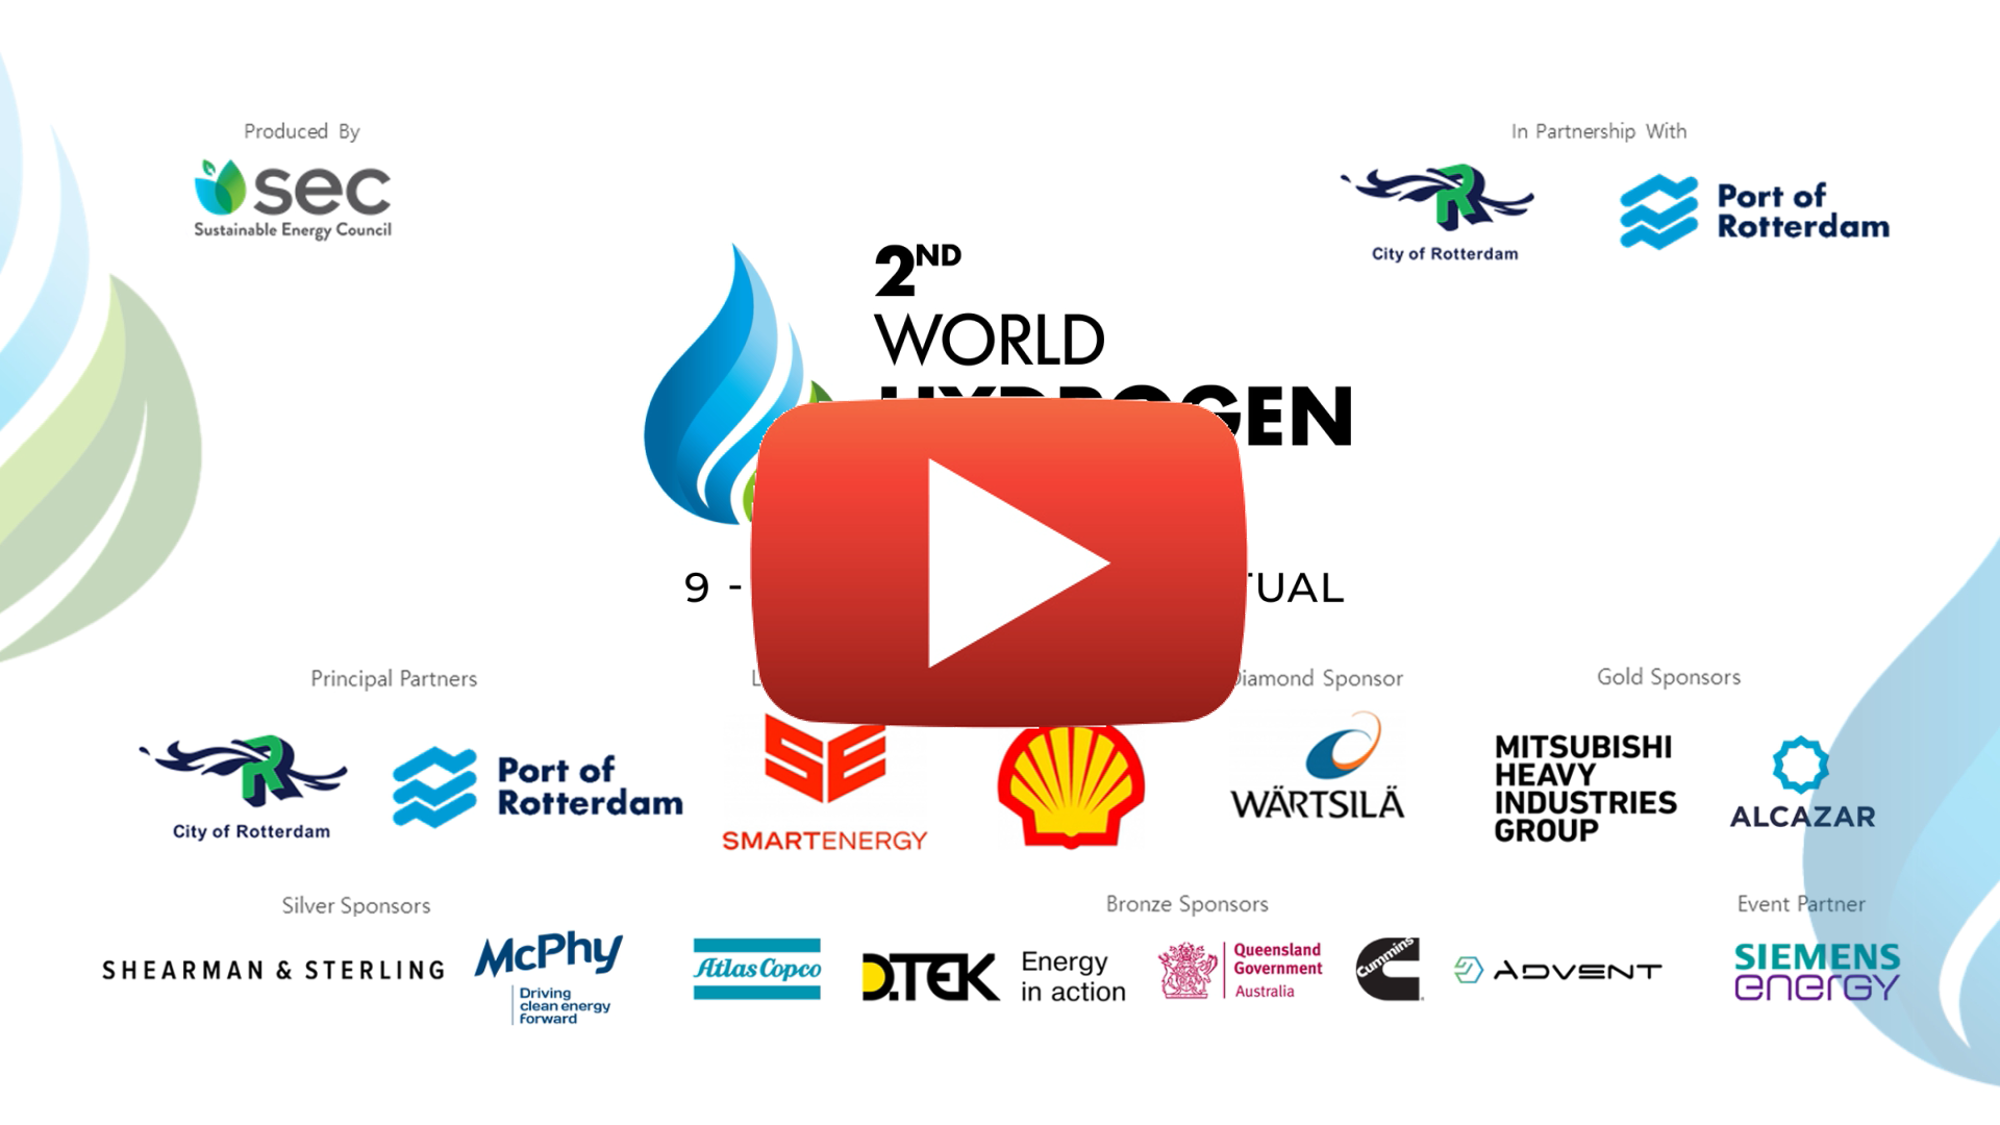 Video Join us at the 2nd World Hydrogen Summit, 9 11 March 2021